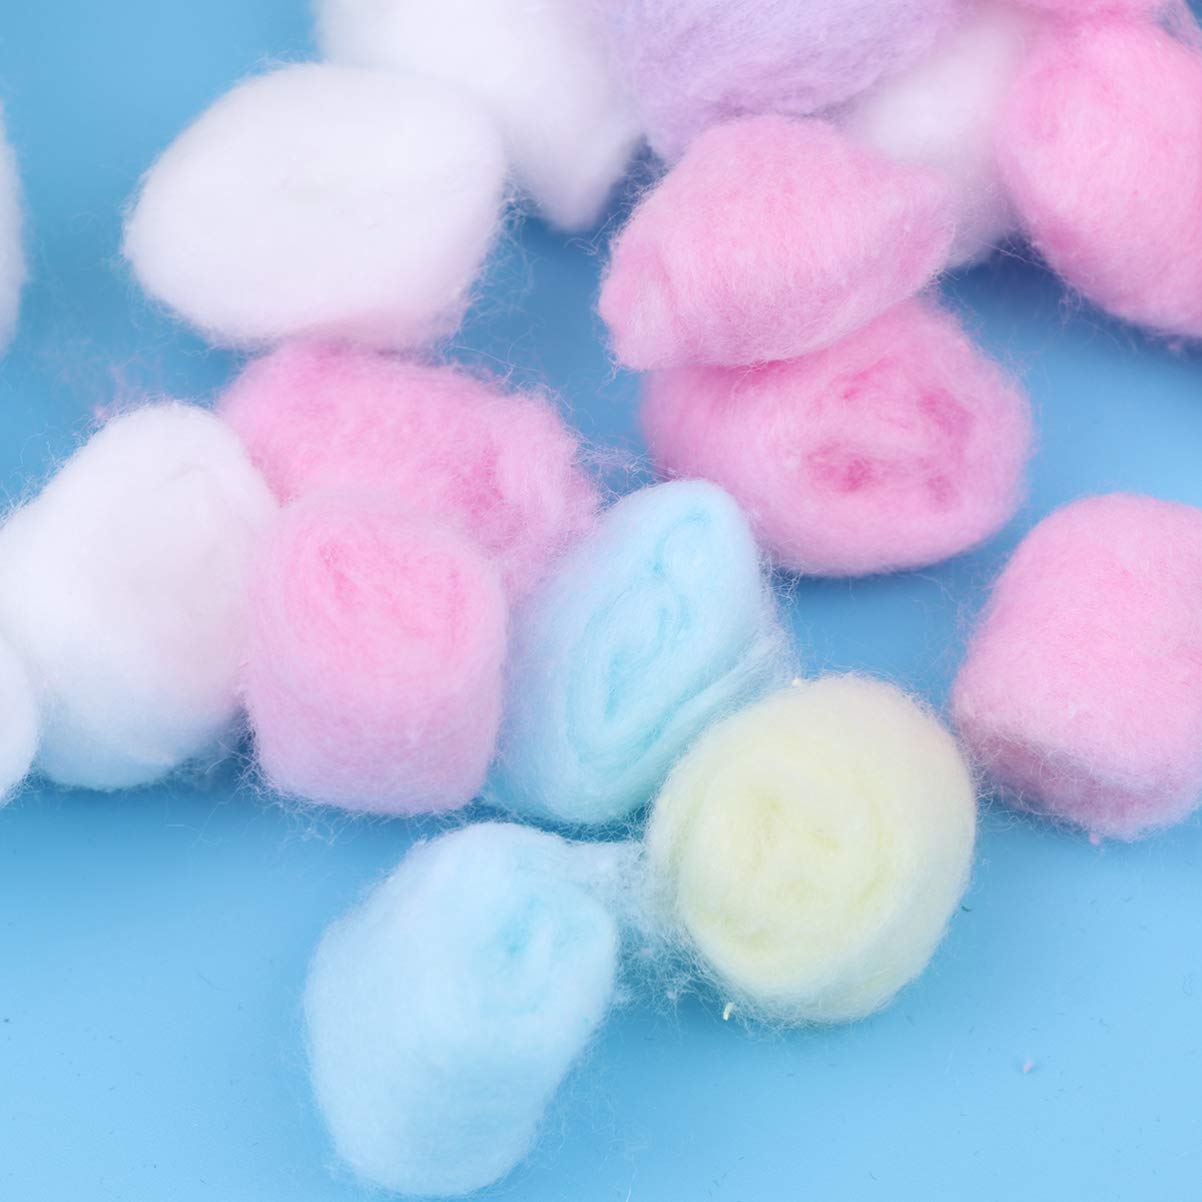 Disposable Colorful Stuffing Cotton Ball for Hamster 